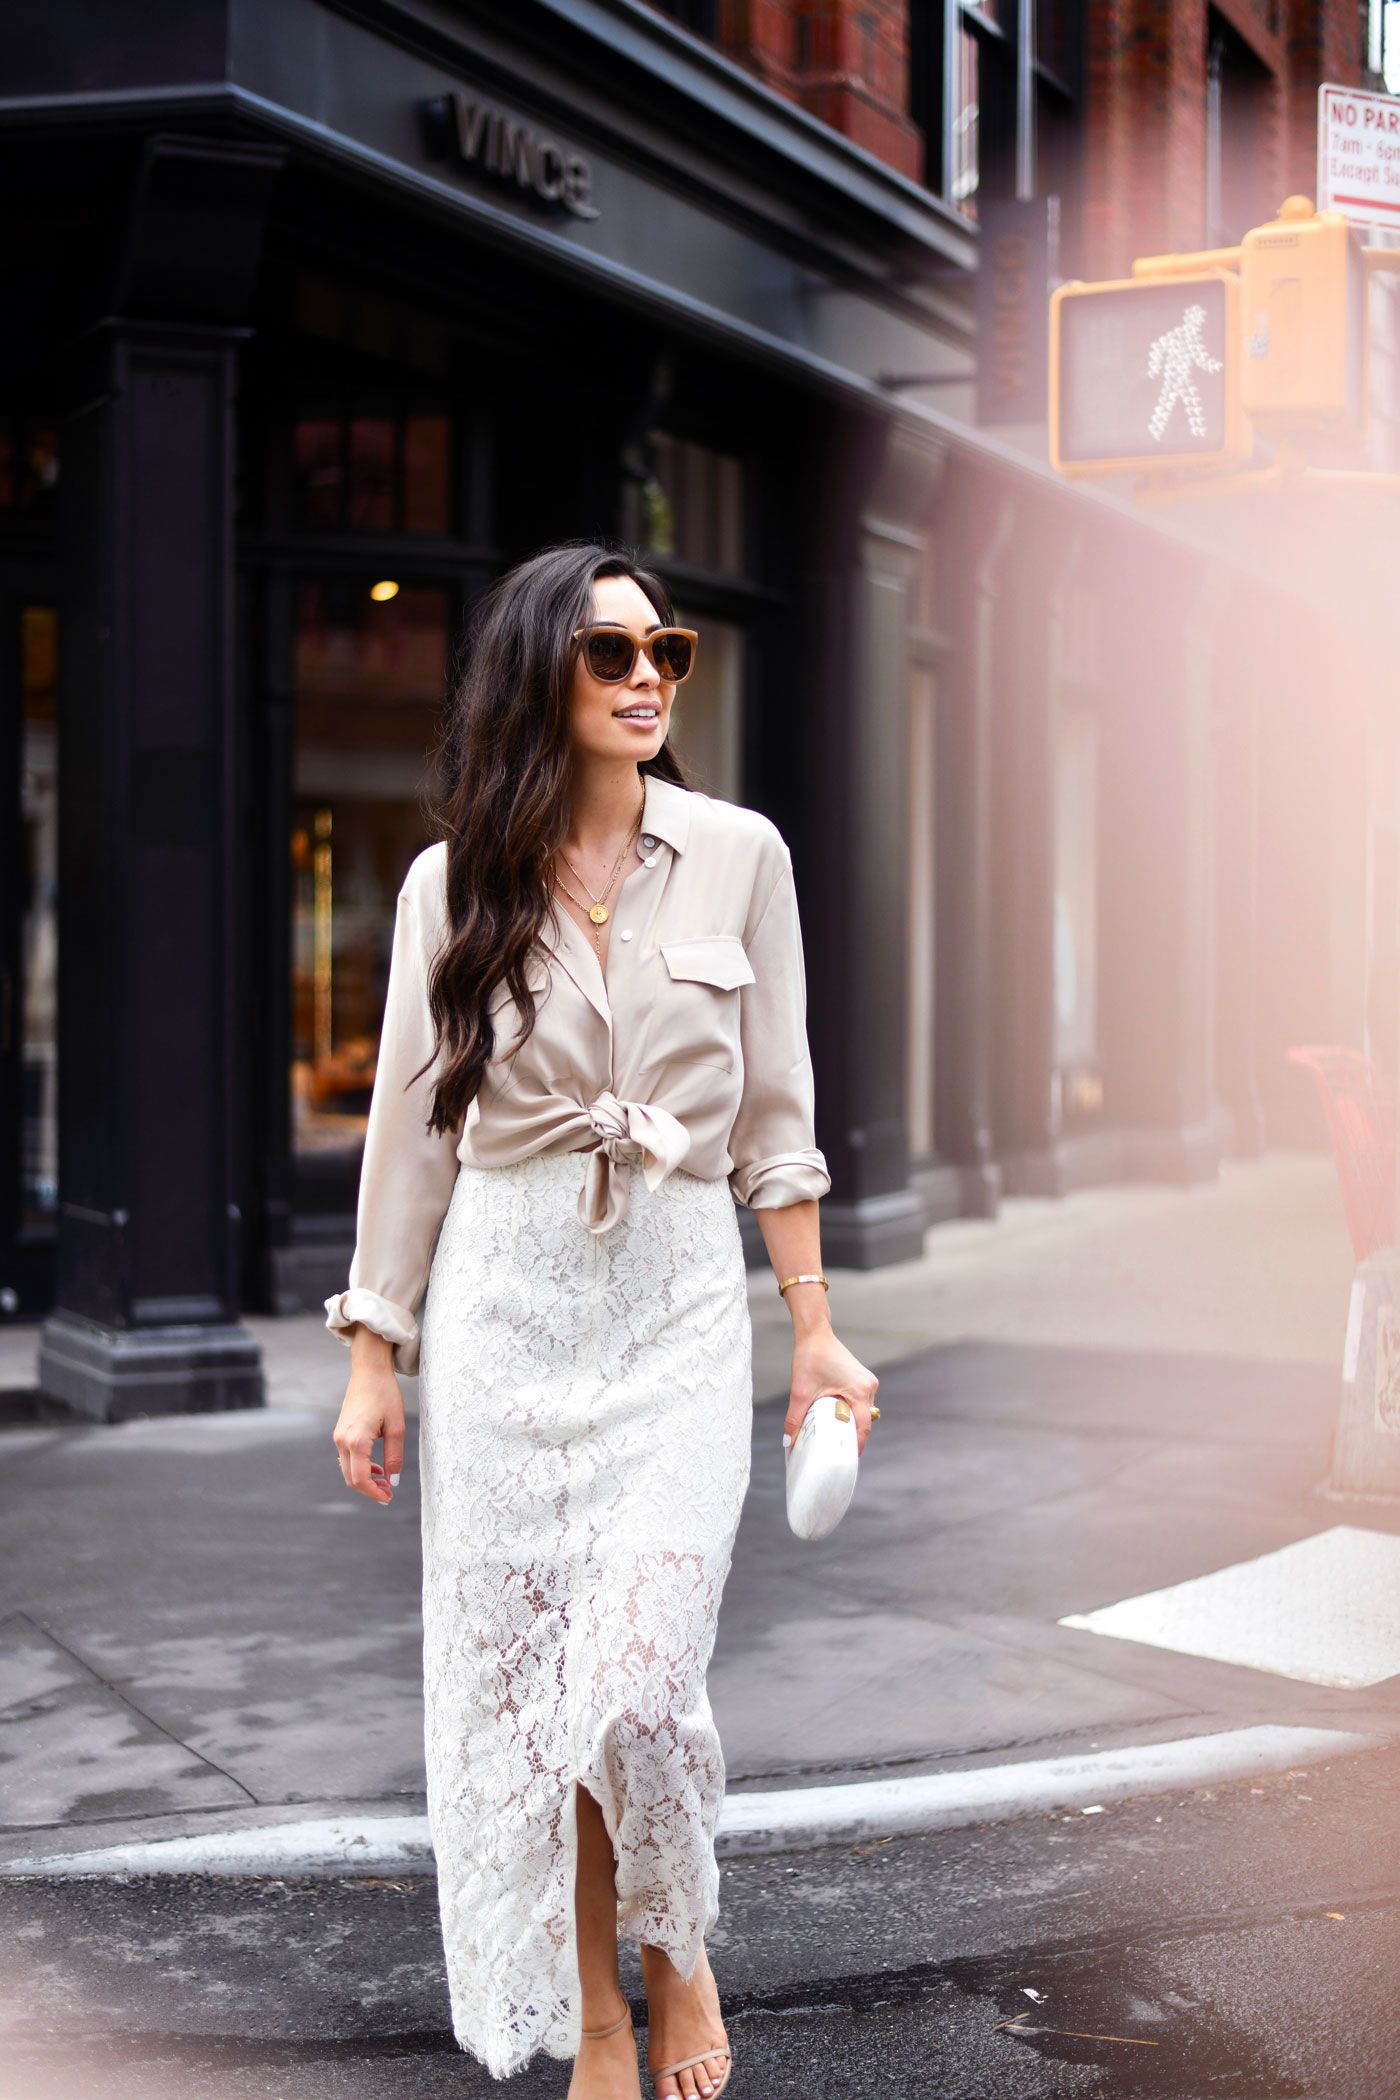 Choose perfect white lace skirt to look
trendy